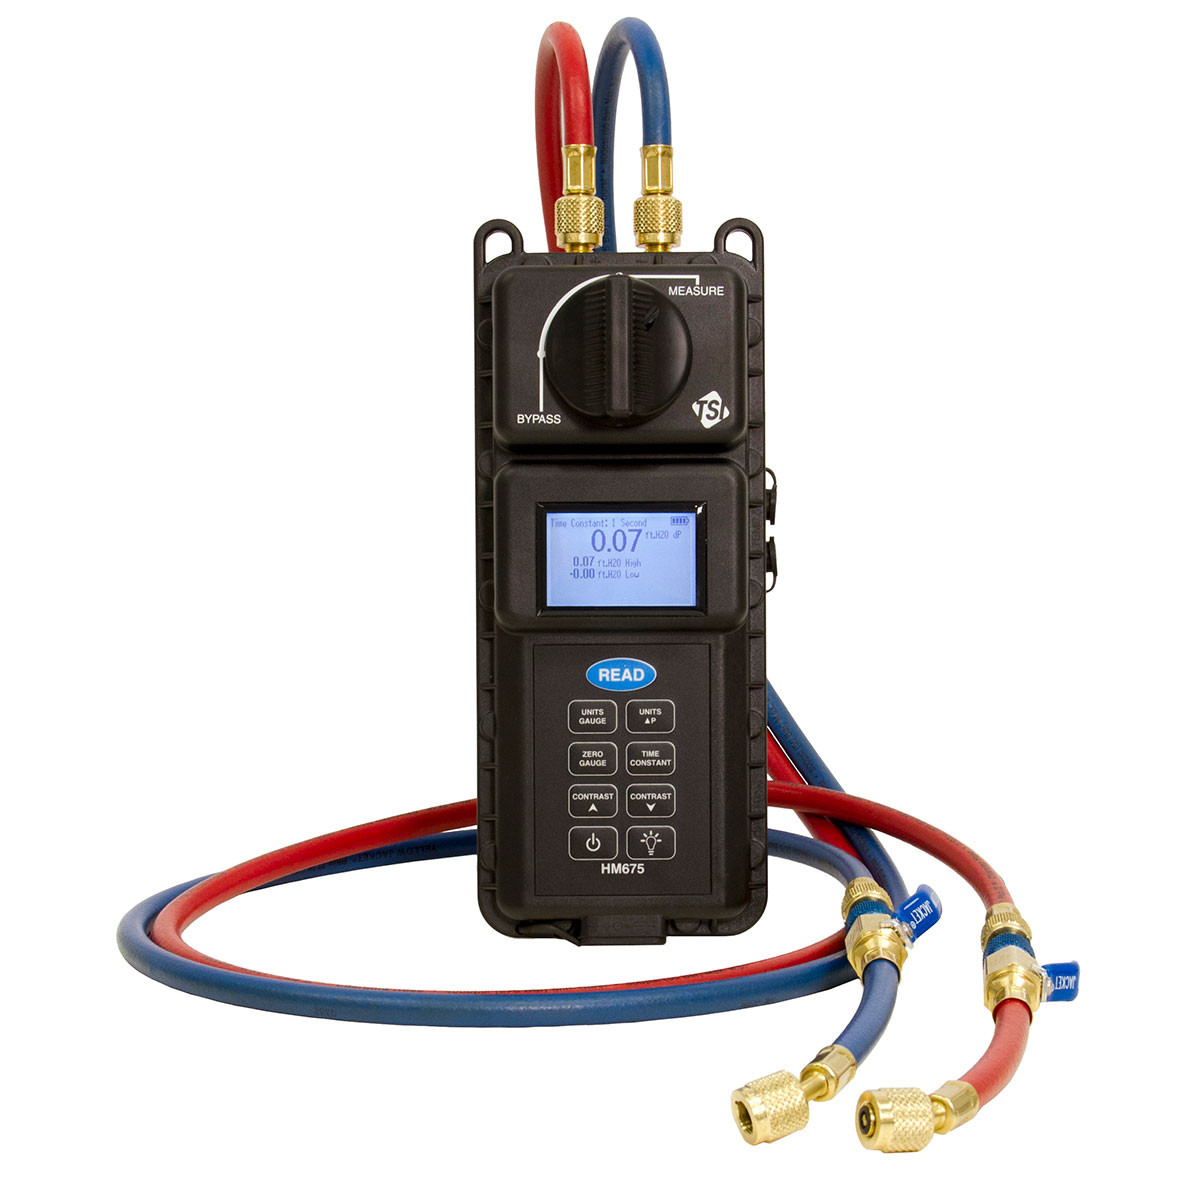 Hydronic Manometer for Measures water flow rates for both heating and cooling water systems-